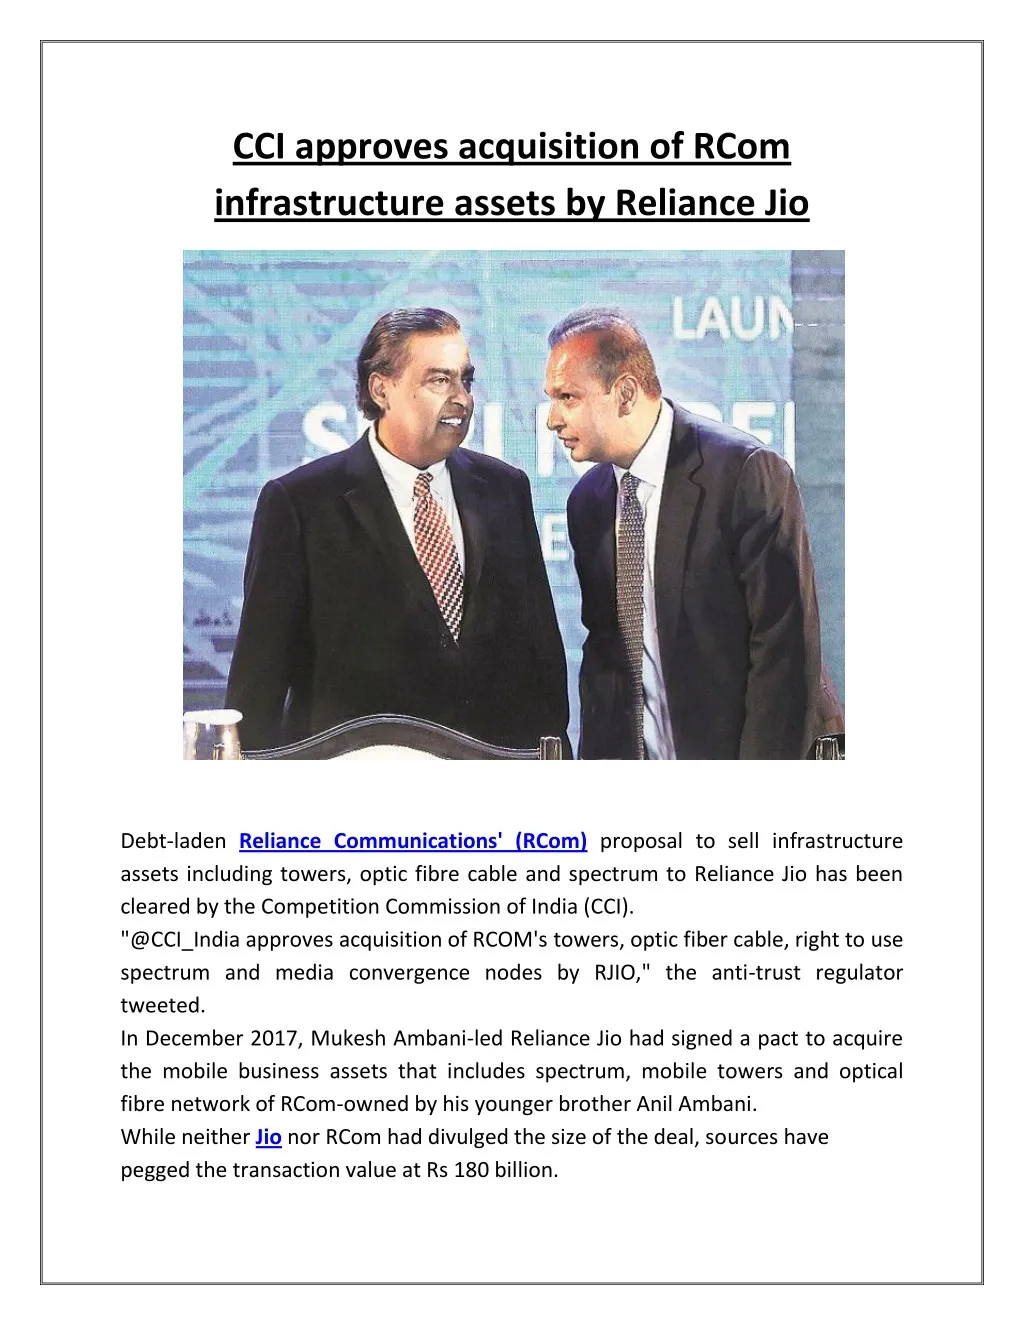 cci approves acquisition of rcom infrastructure